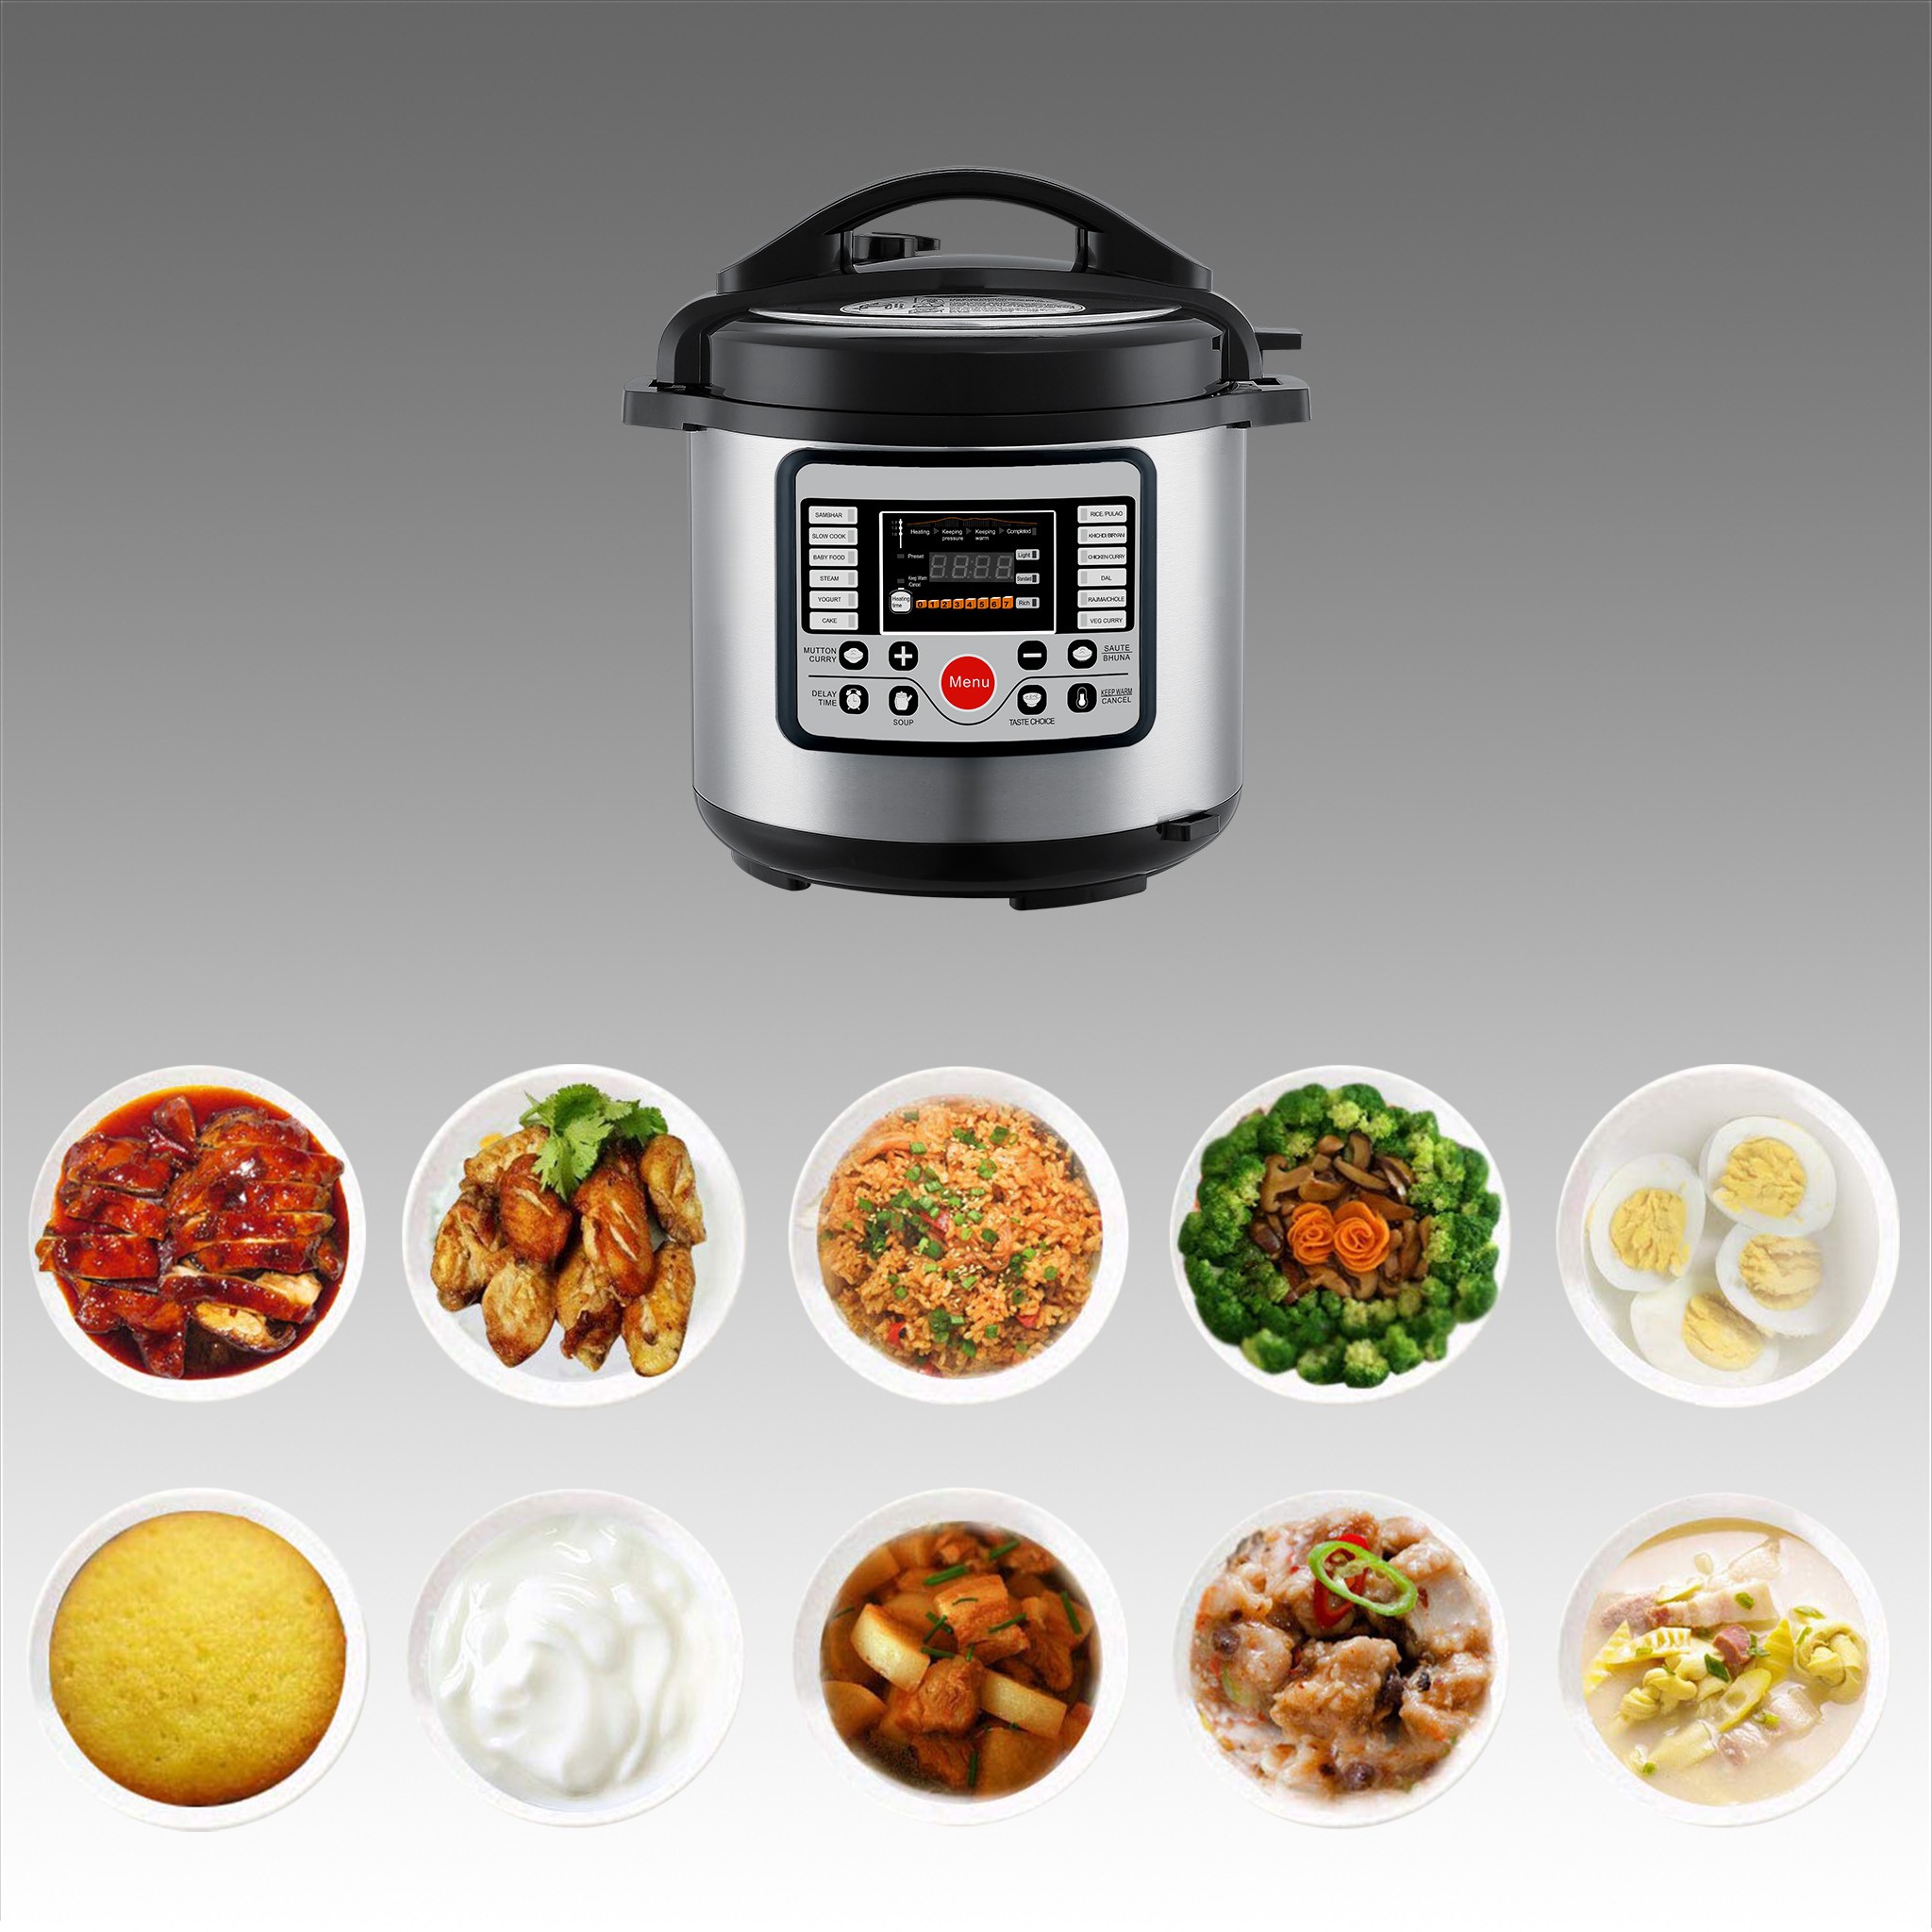 8L Large Cooker Adjustable Programmable Stainless Steel Commercial Pressure Cooker Electric Pressure Cooker